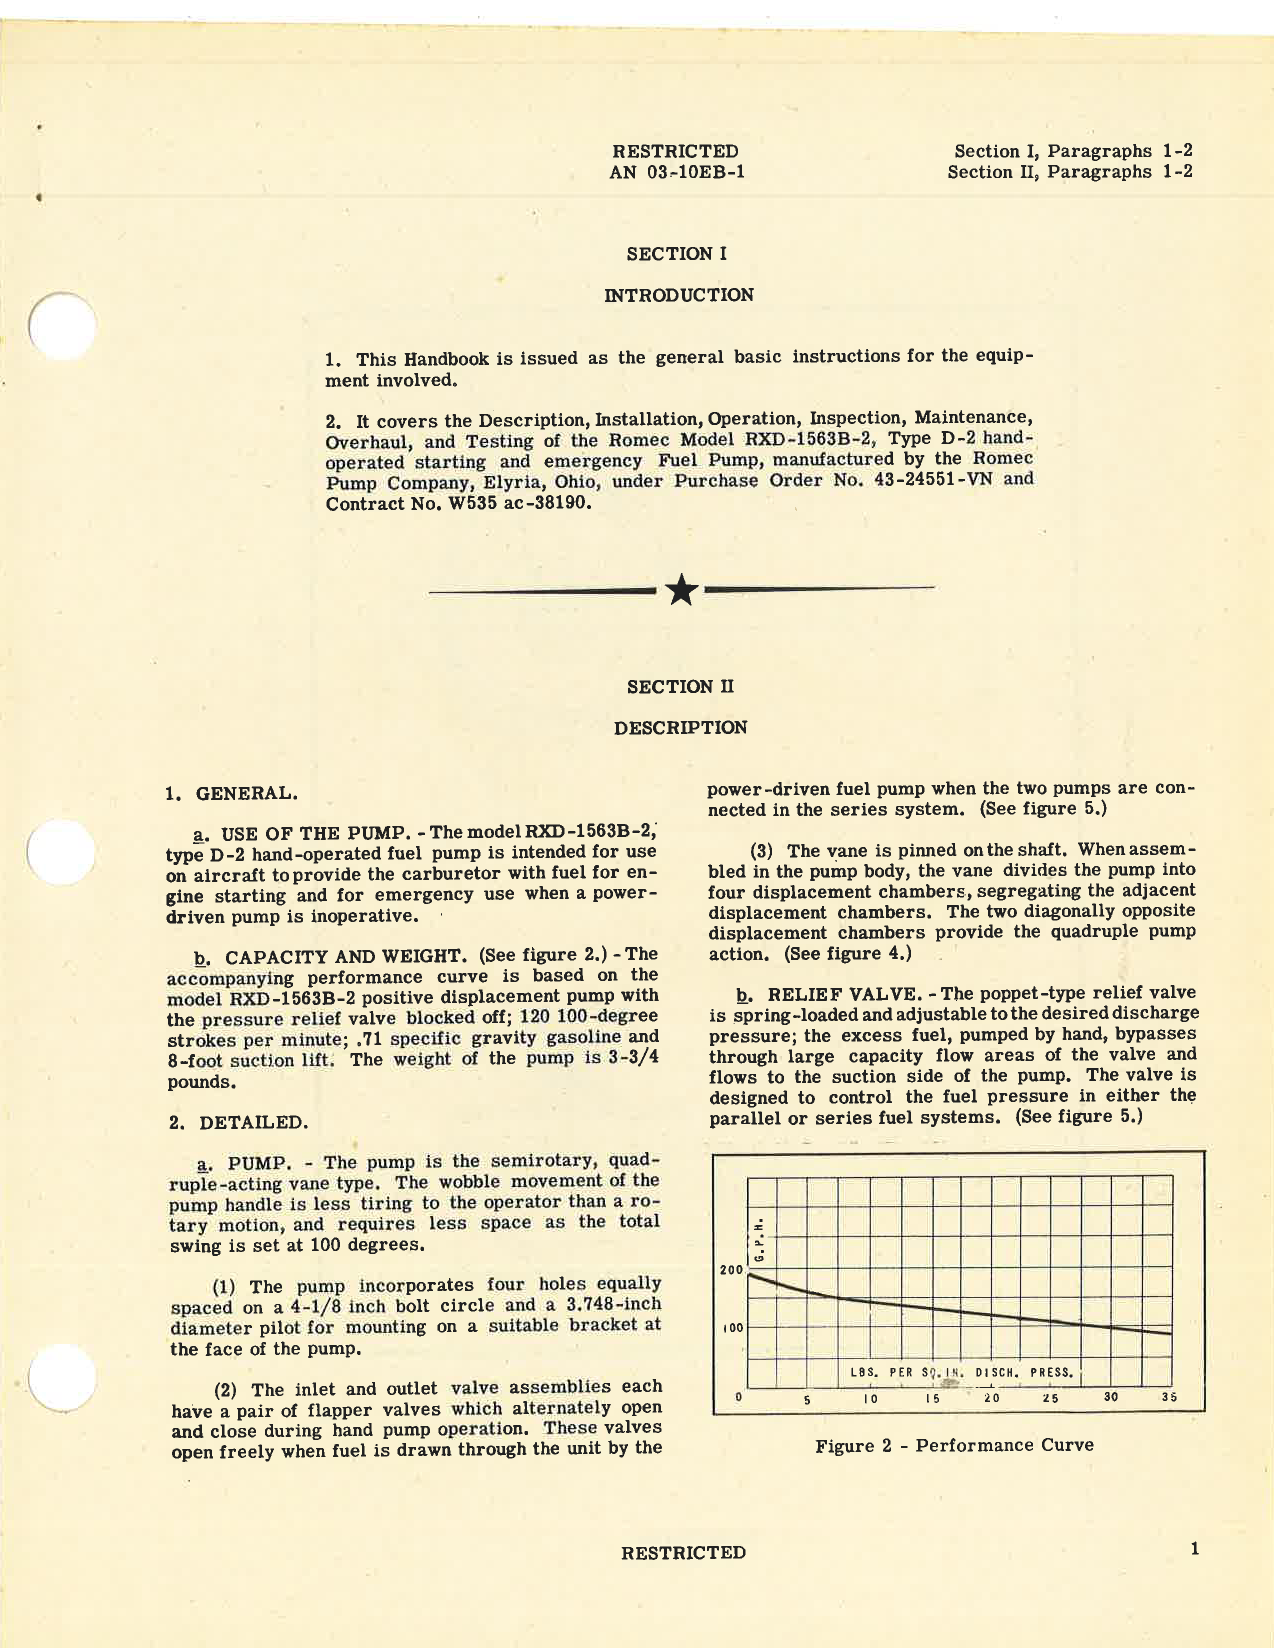 Sample page 5 from AirCorps Library document: Handbook of Instructions with Parts Catalog for Type D-2 Fuel Pump